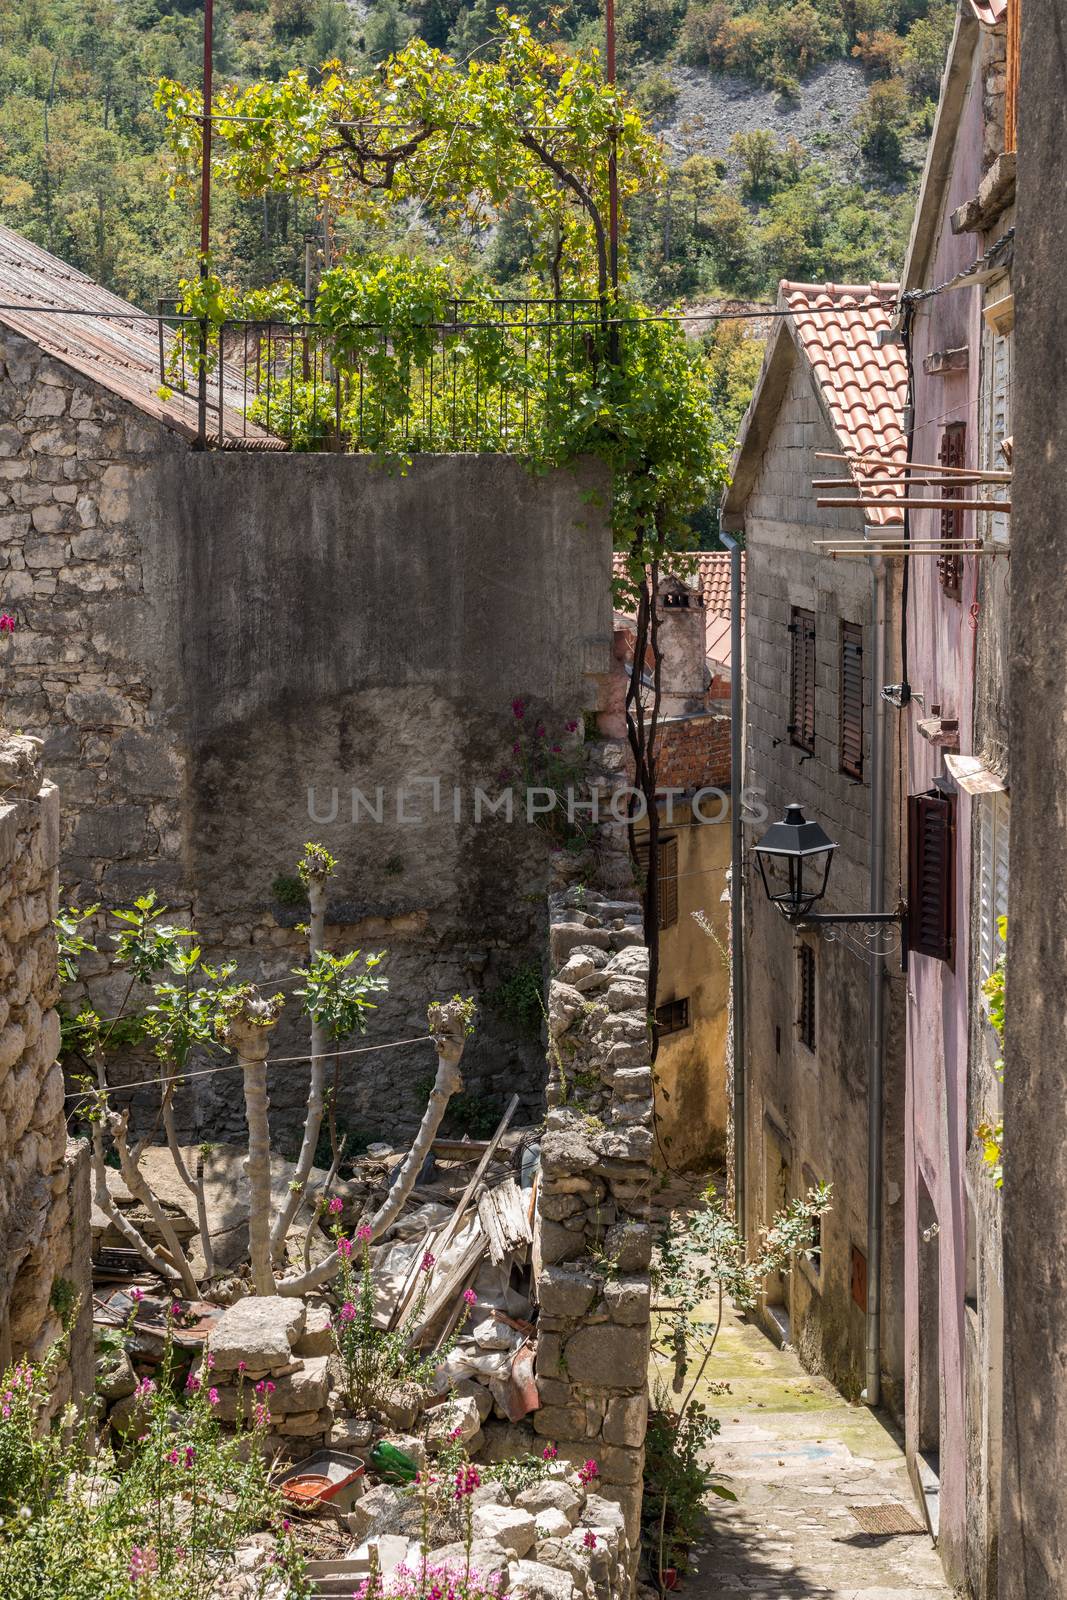 Rustic homes in Croatian town of Novigrad in Istria County by steheap